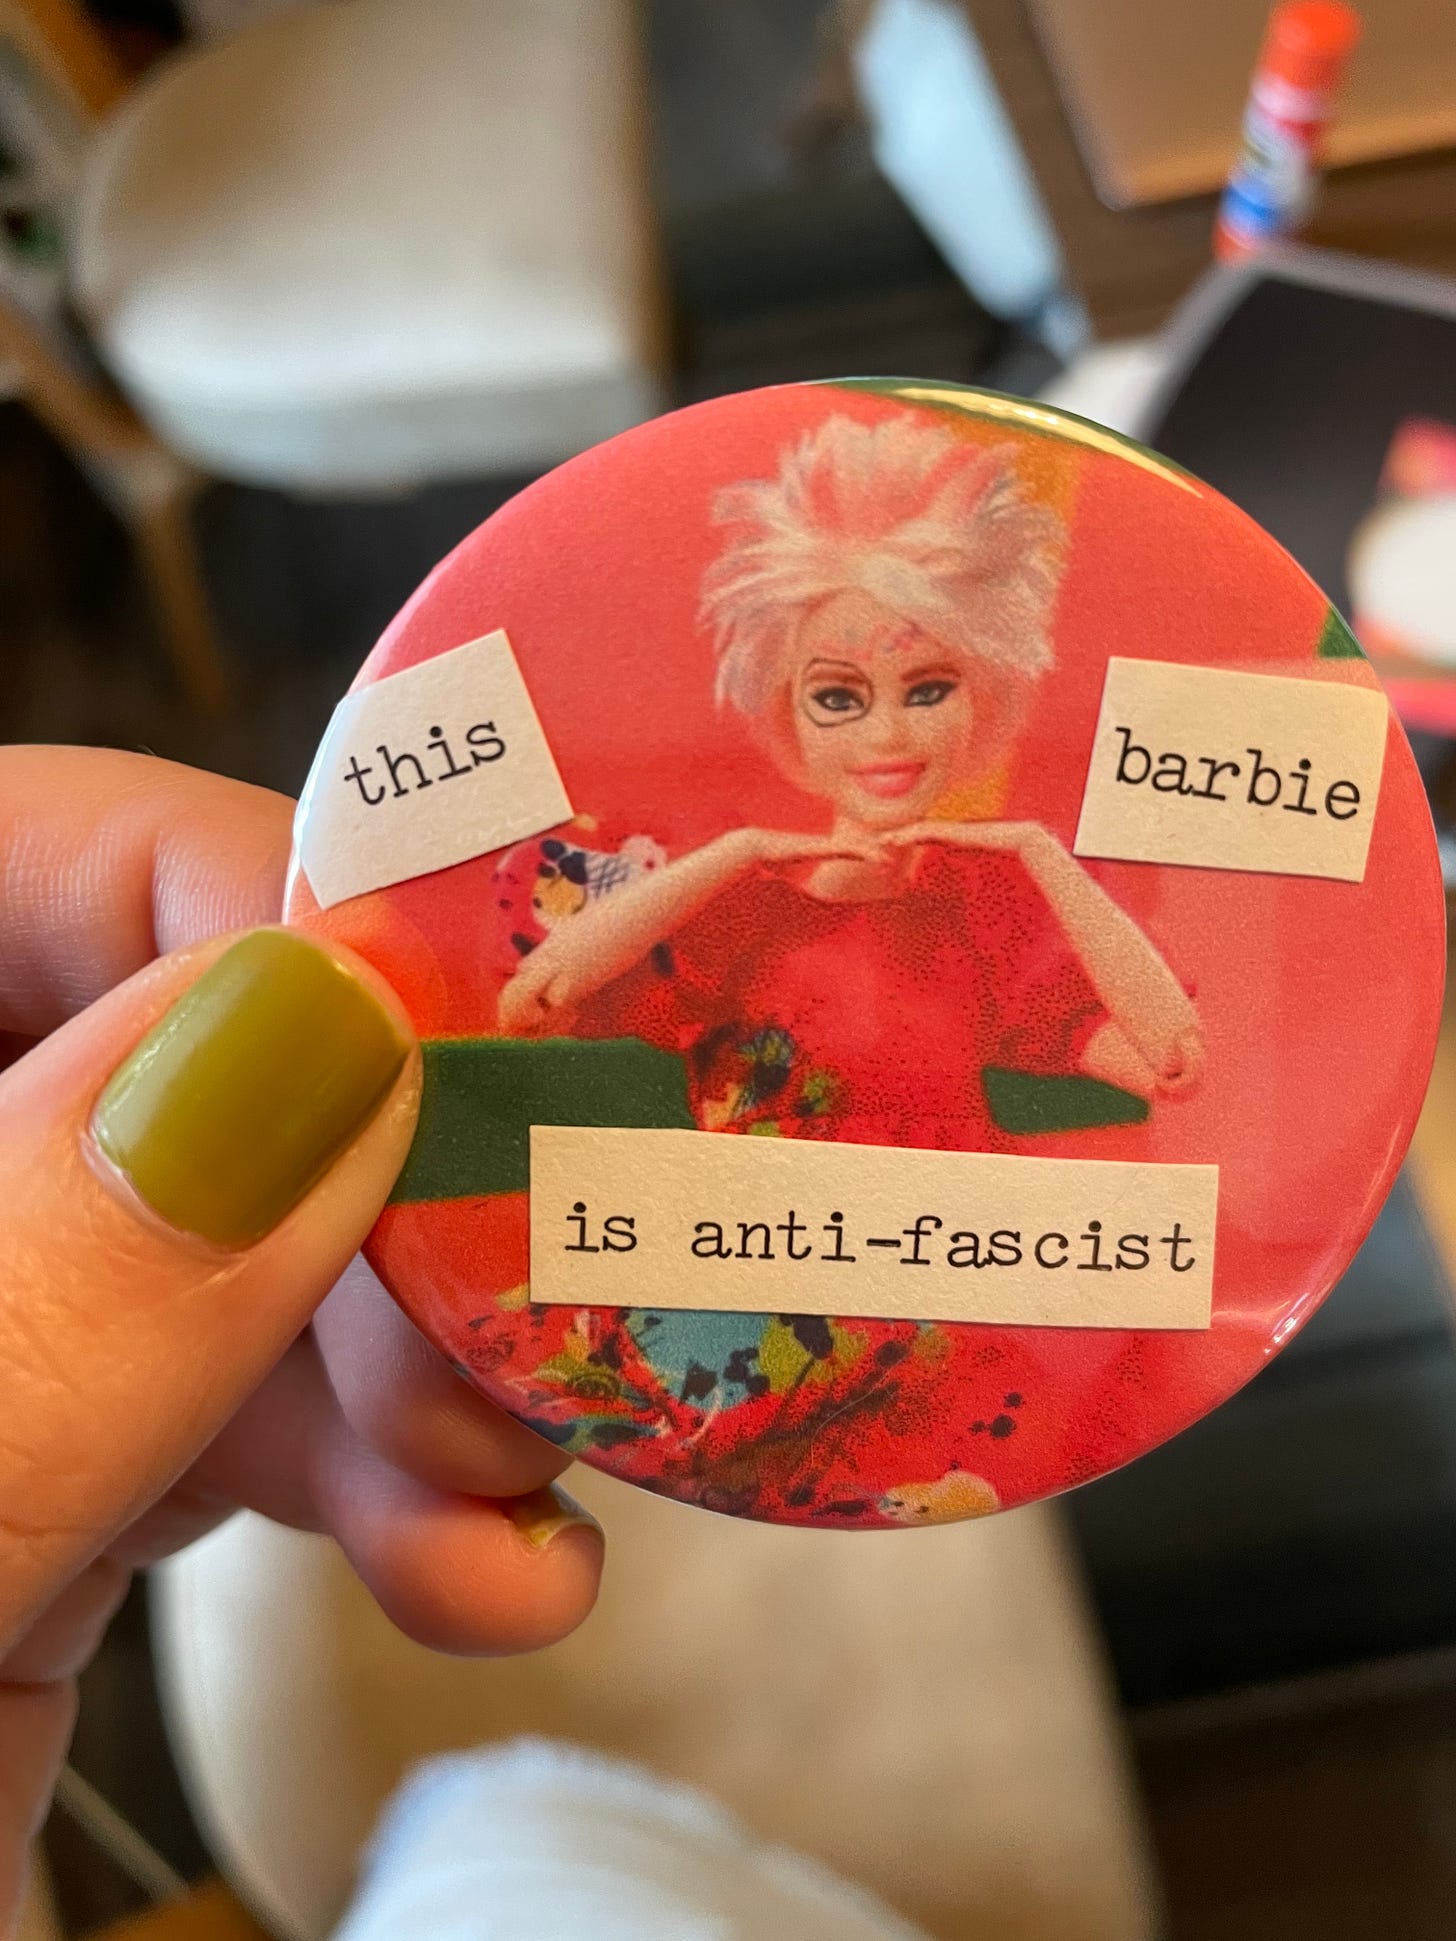 a pink button of weird barbie from the barbie movie--a barbie with its hair cut short and with marker drawings on her face. black type on white background is cut up and says this barbie is anti-fascist